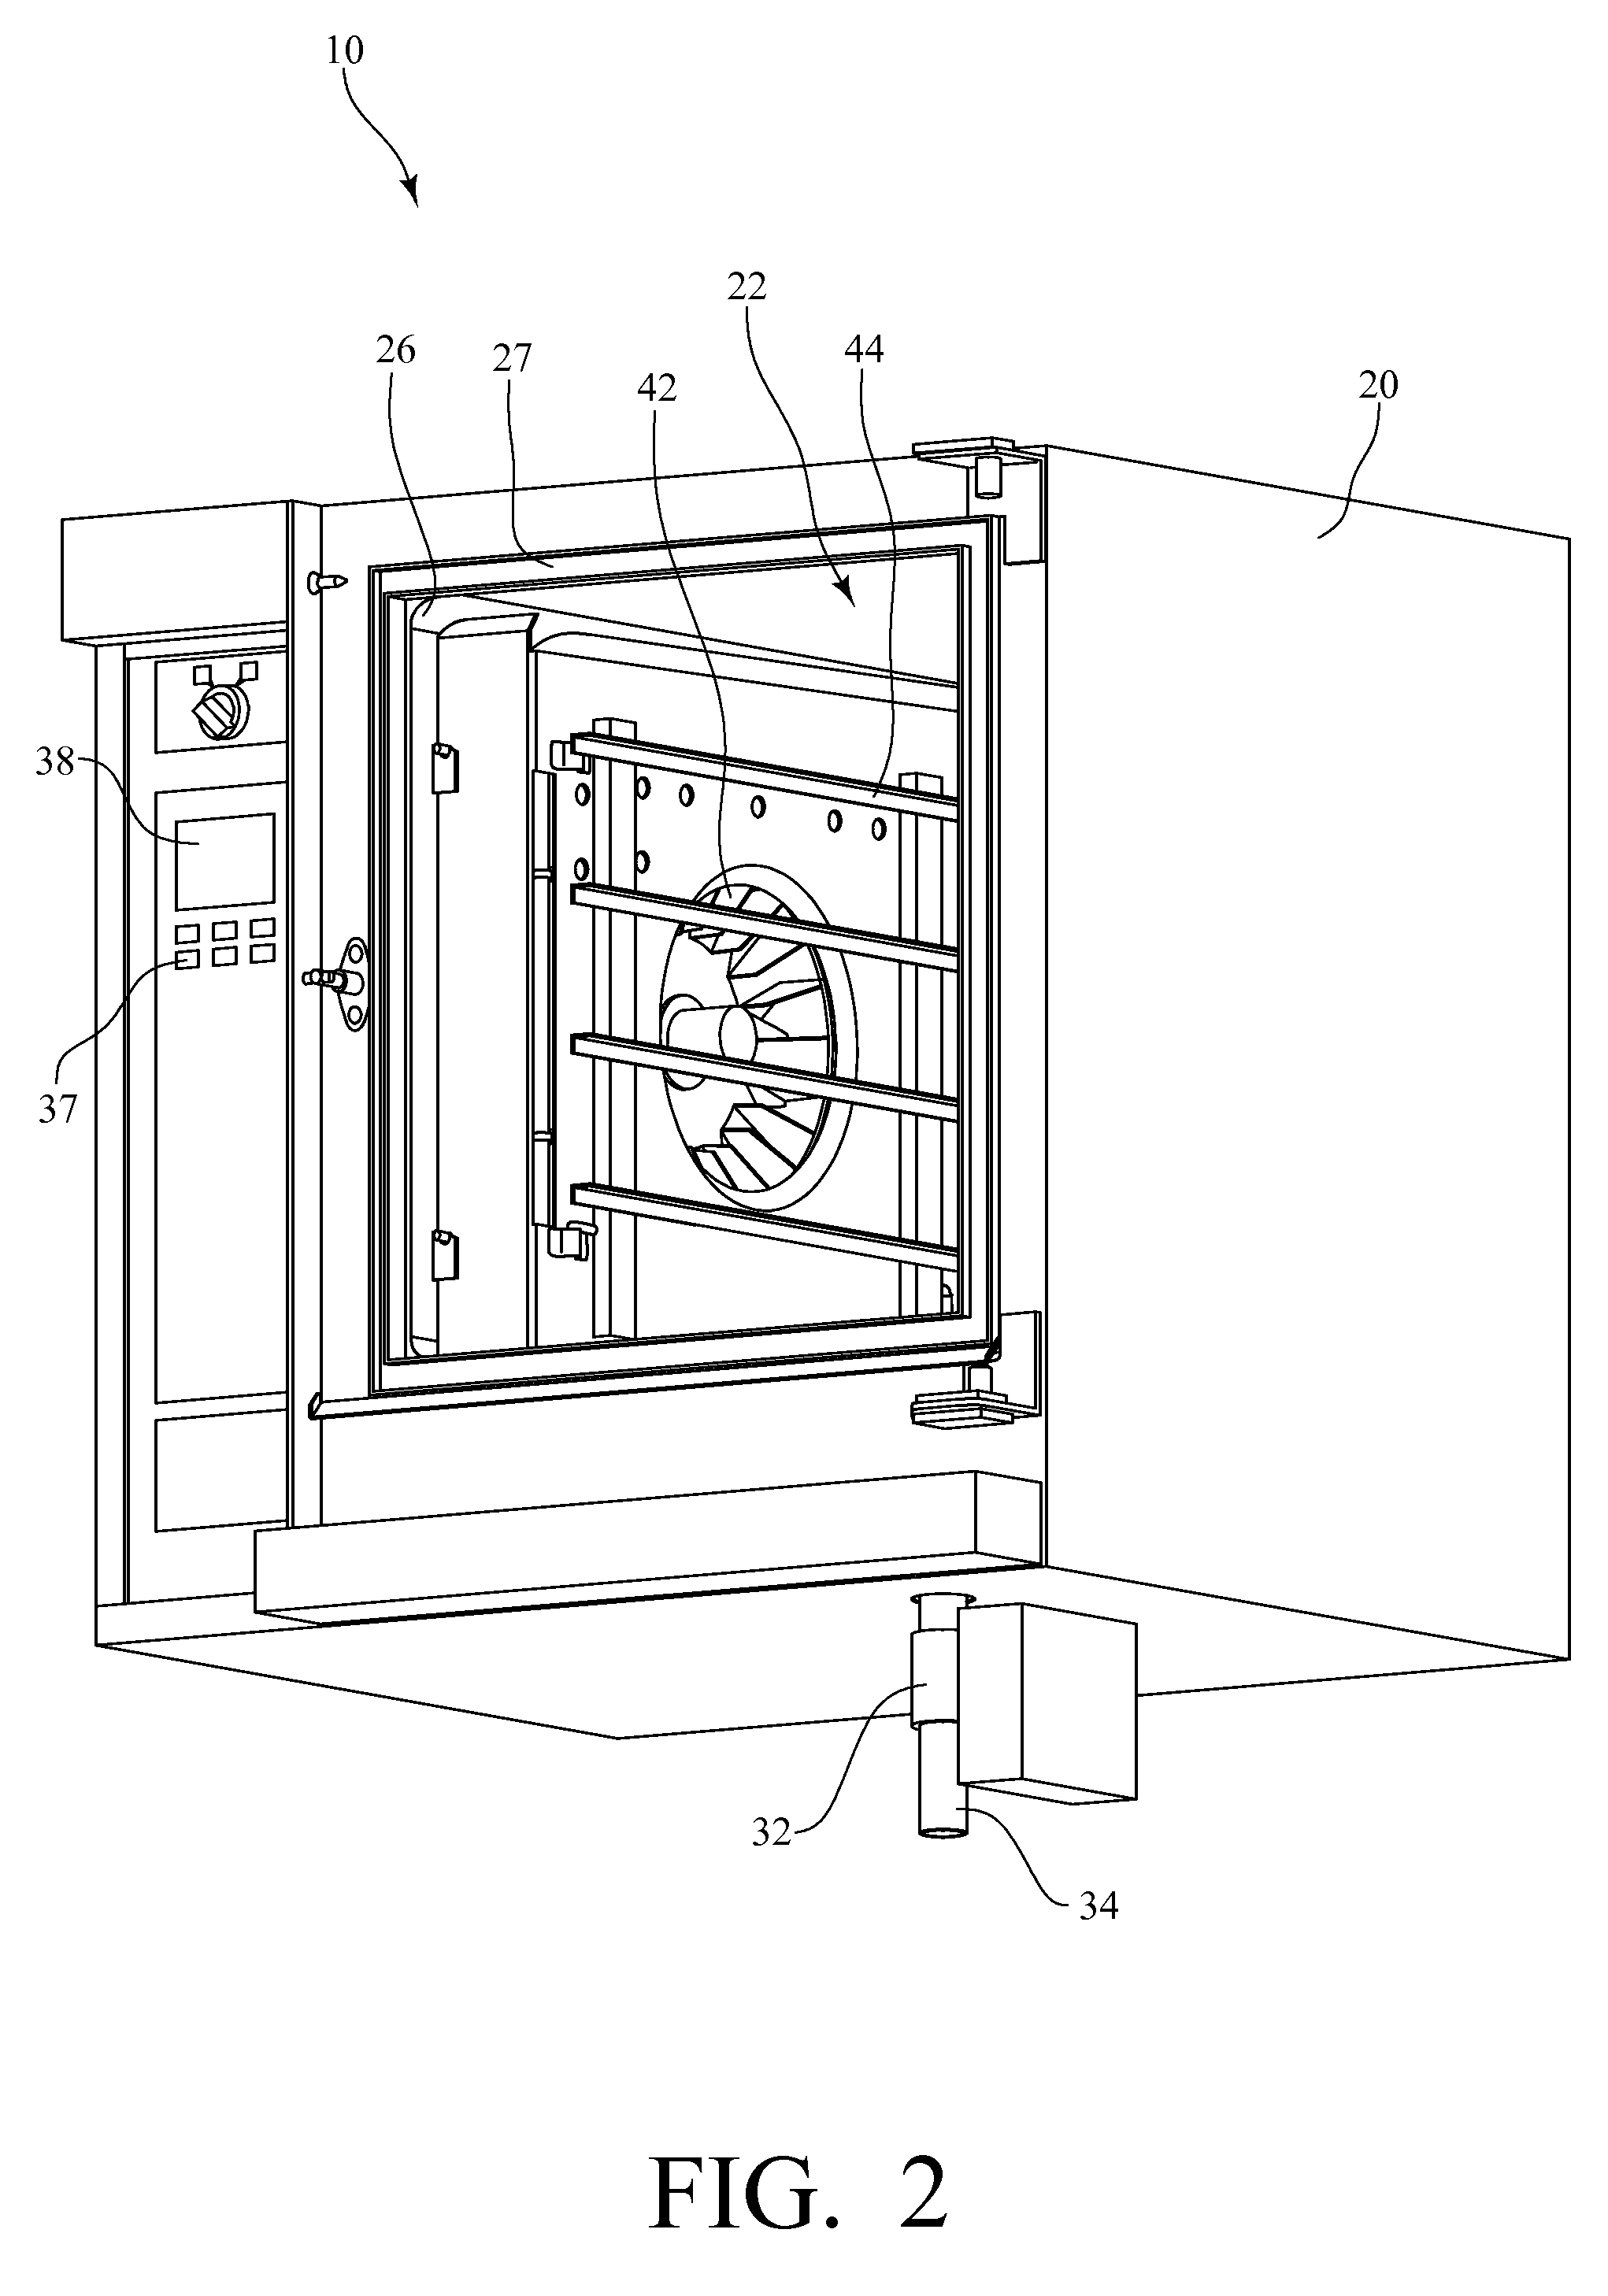 Self-cleaning convection oven